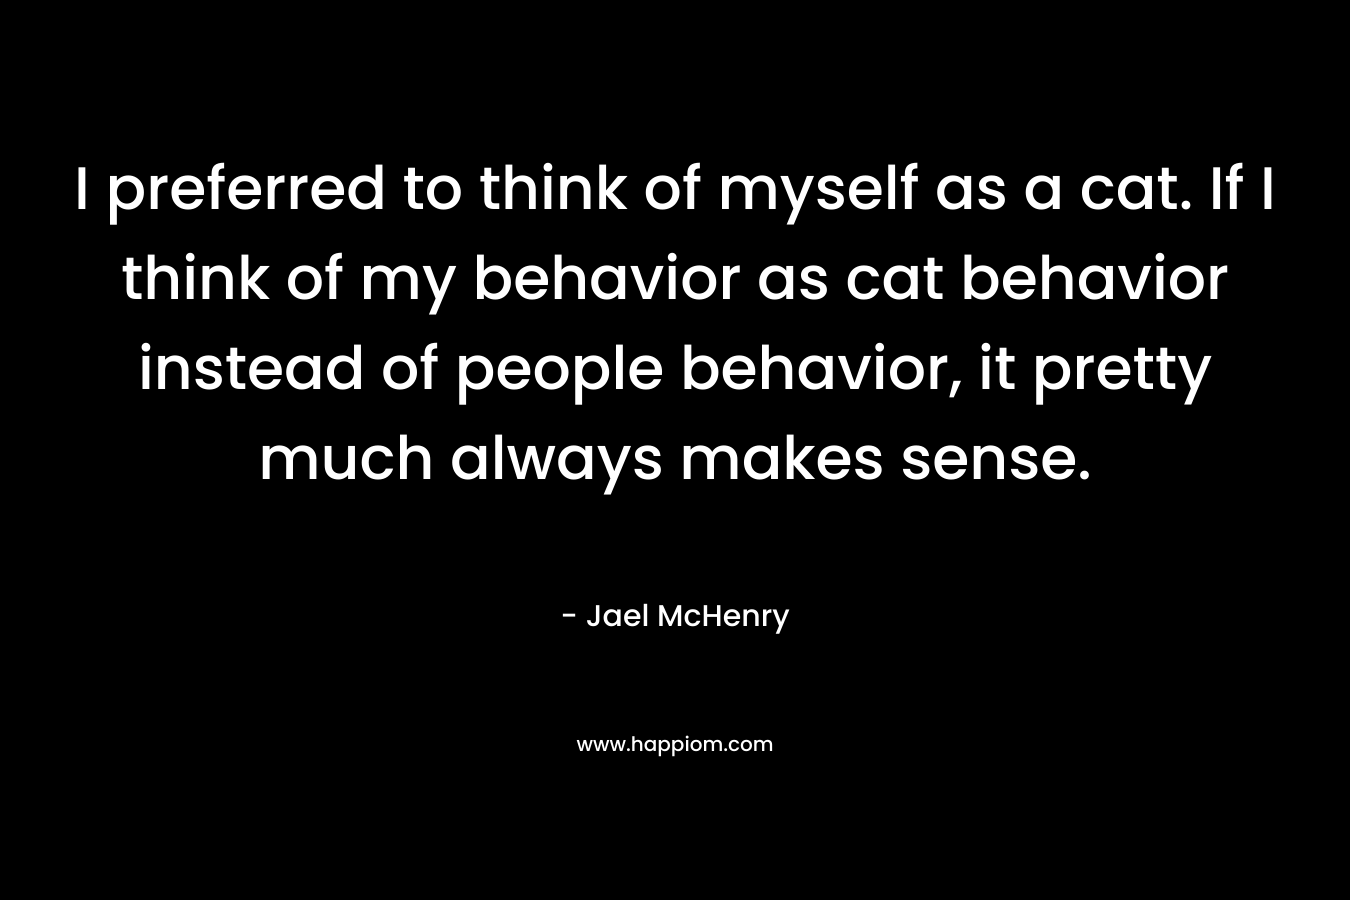 I preferred to think of myself as a cat. If I think of my behavior as cat behavior instead of people behavior, it pretty much always makes sense. – Jael McHenry